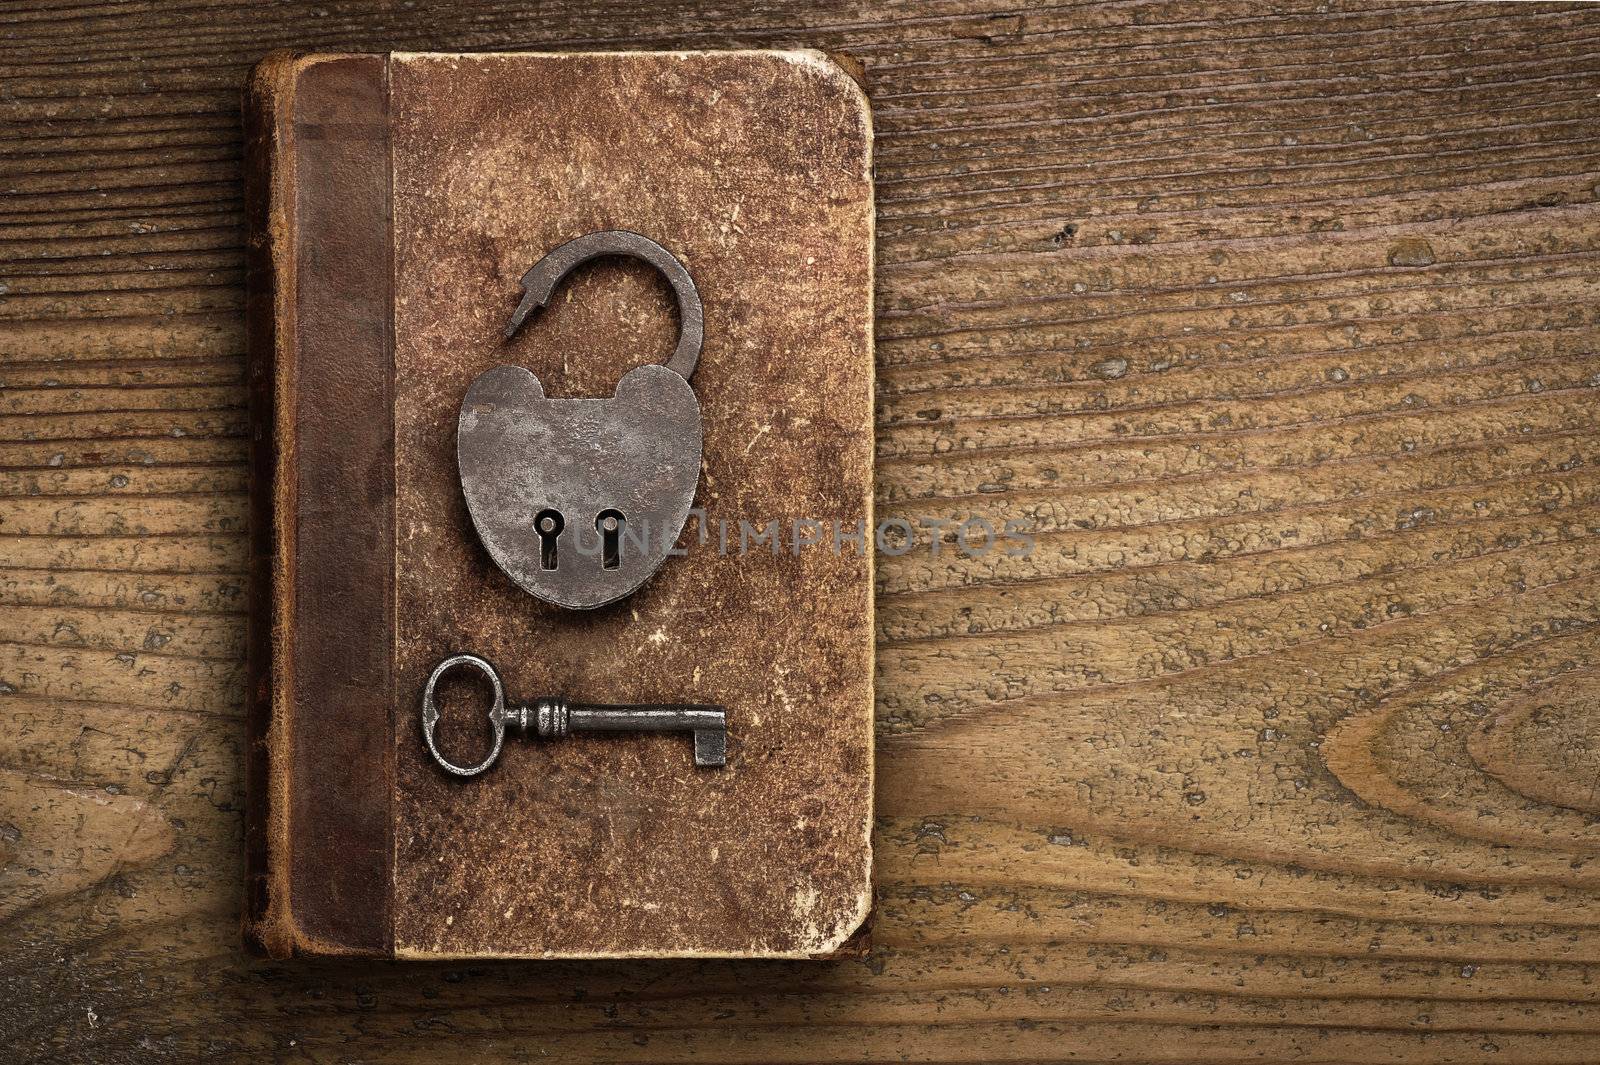 Antique Padlock with key on old book